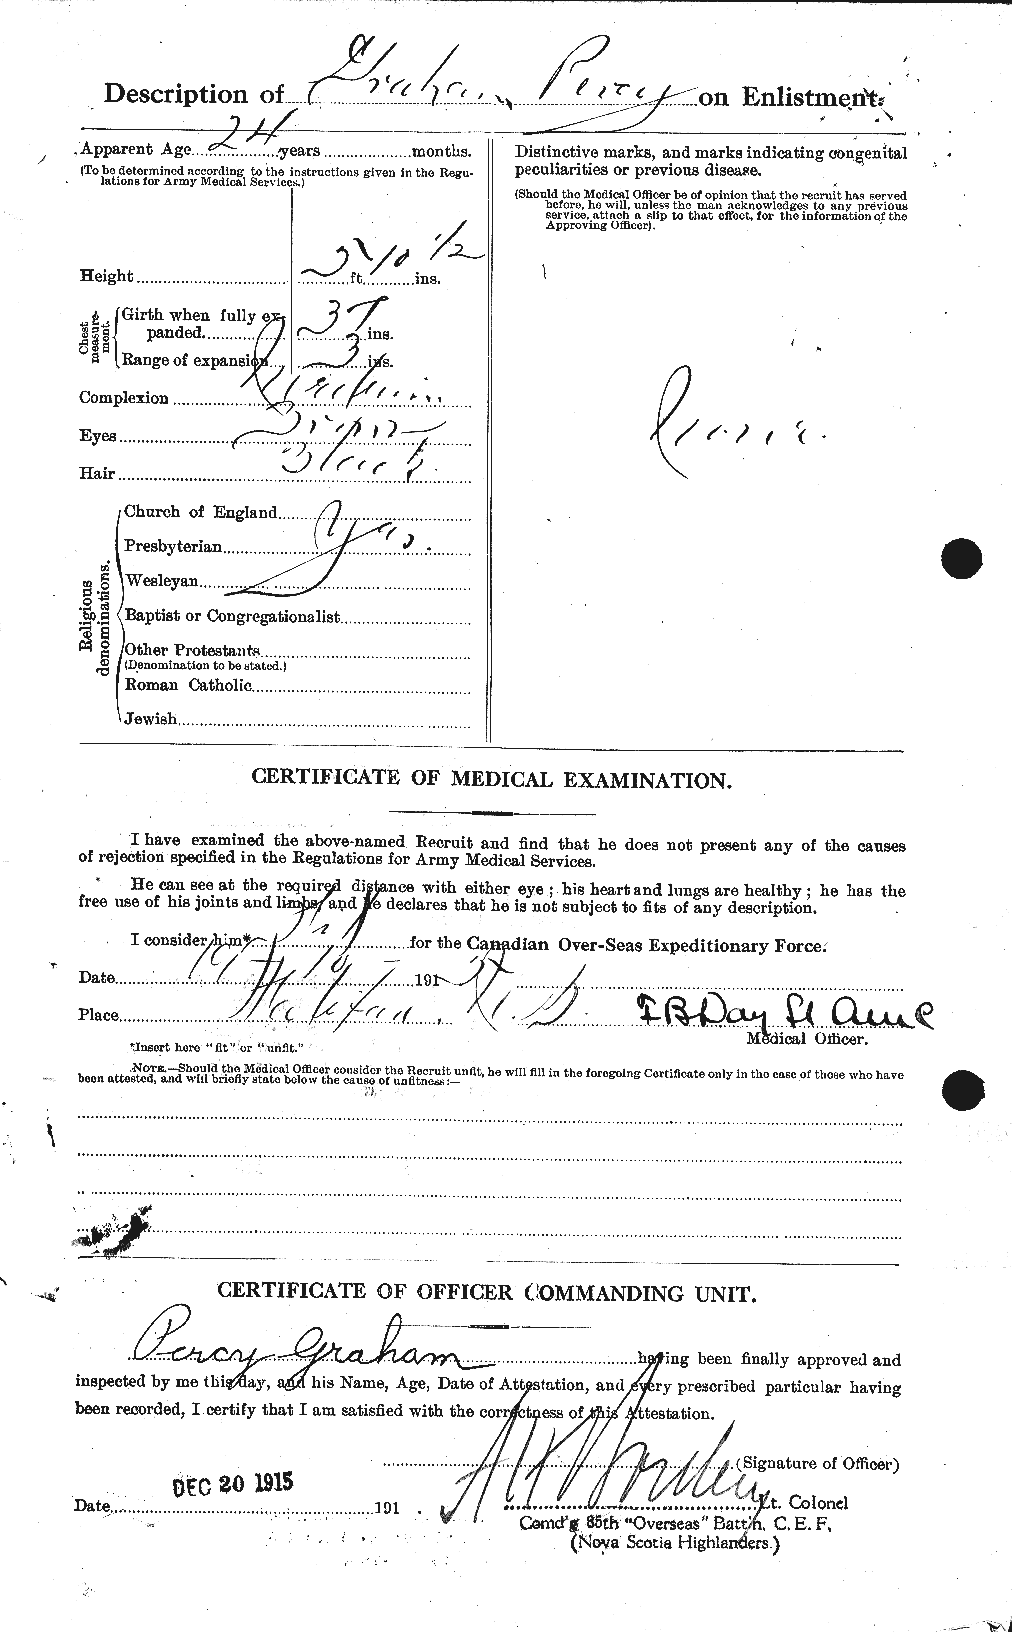 Personnel Records of the First World War - CEF 359337b